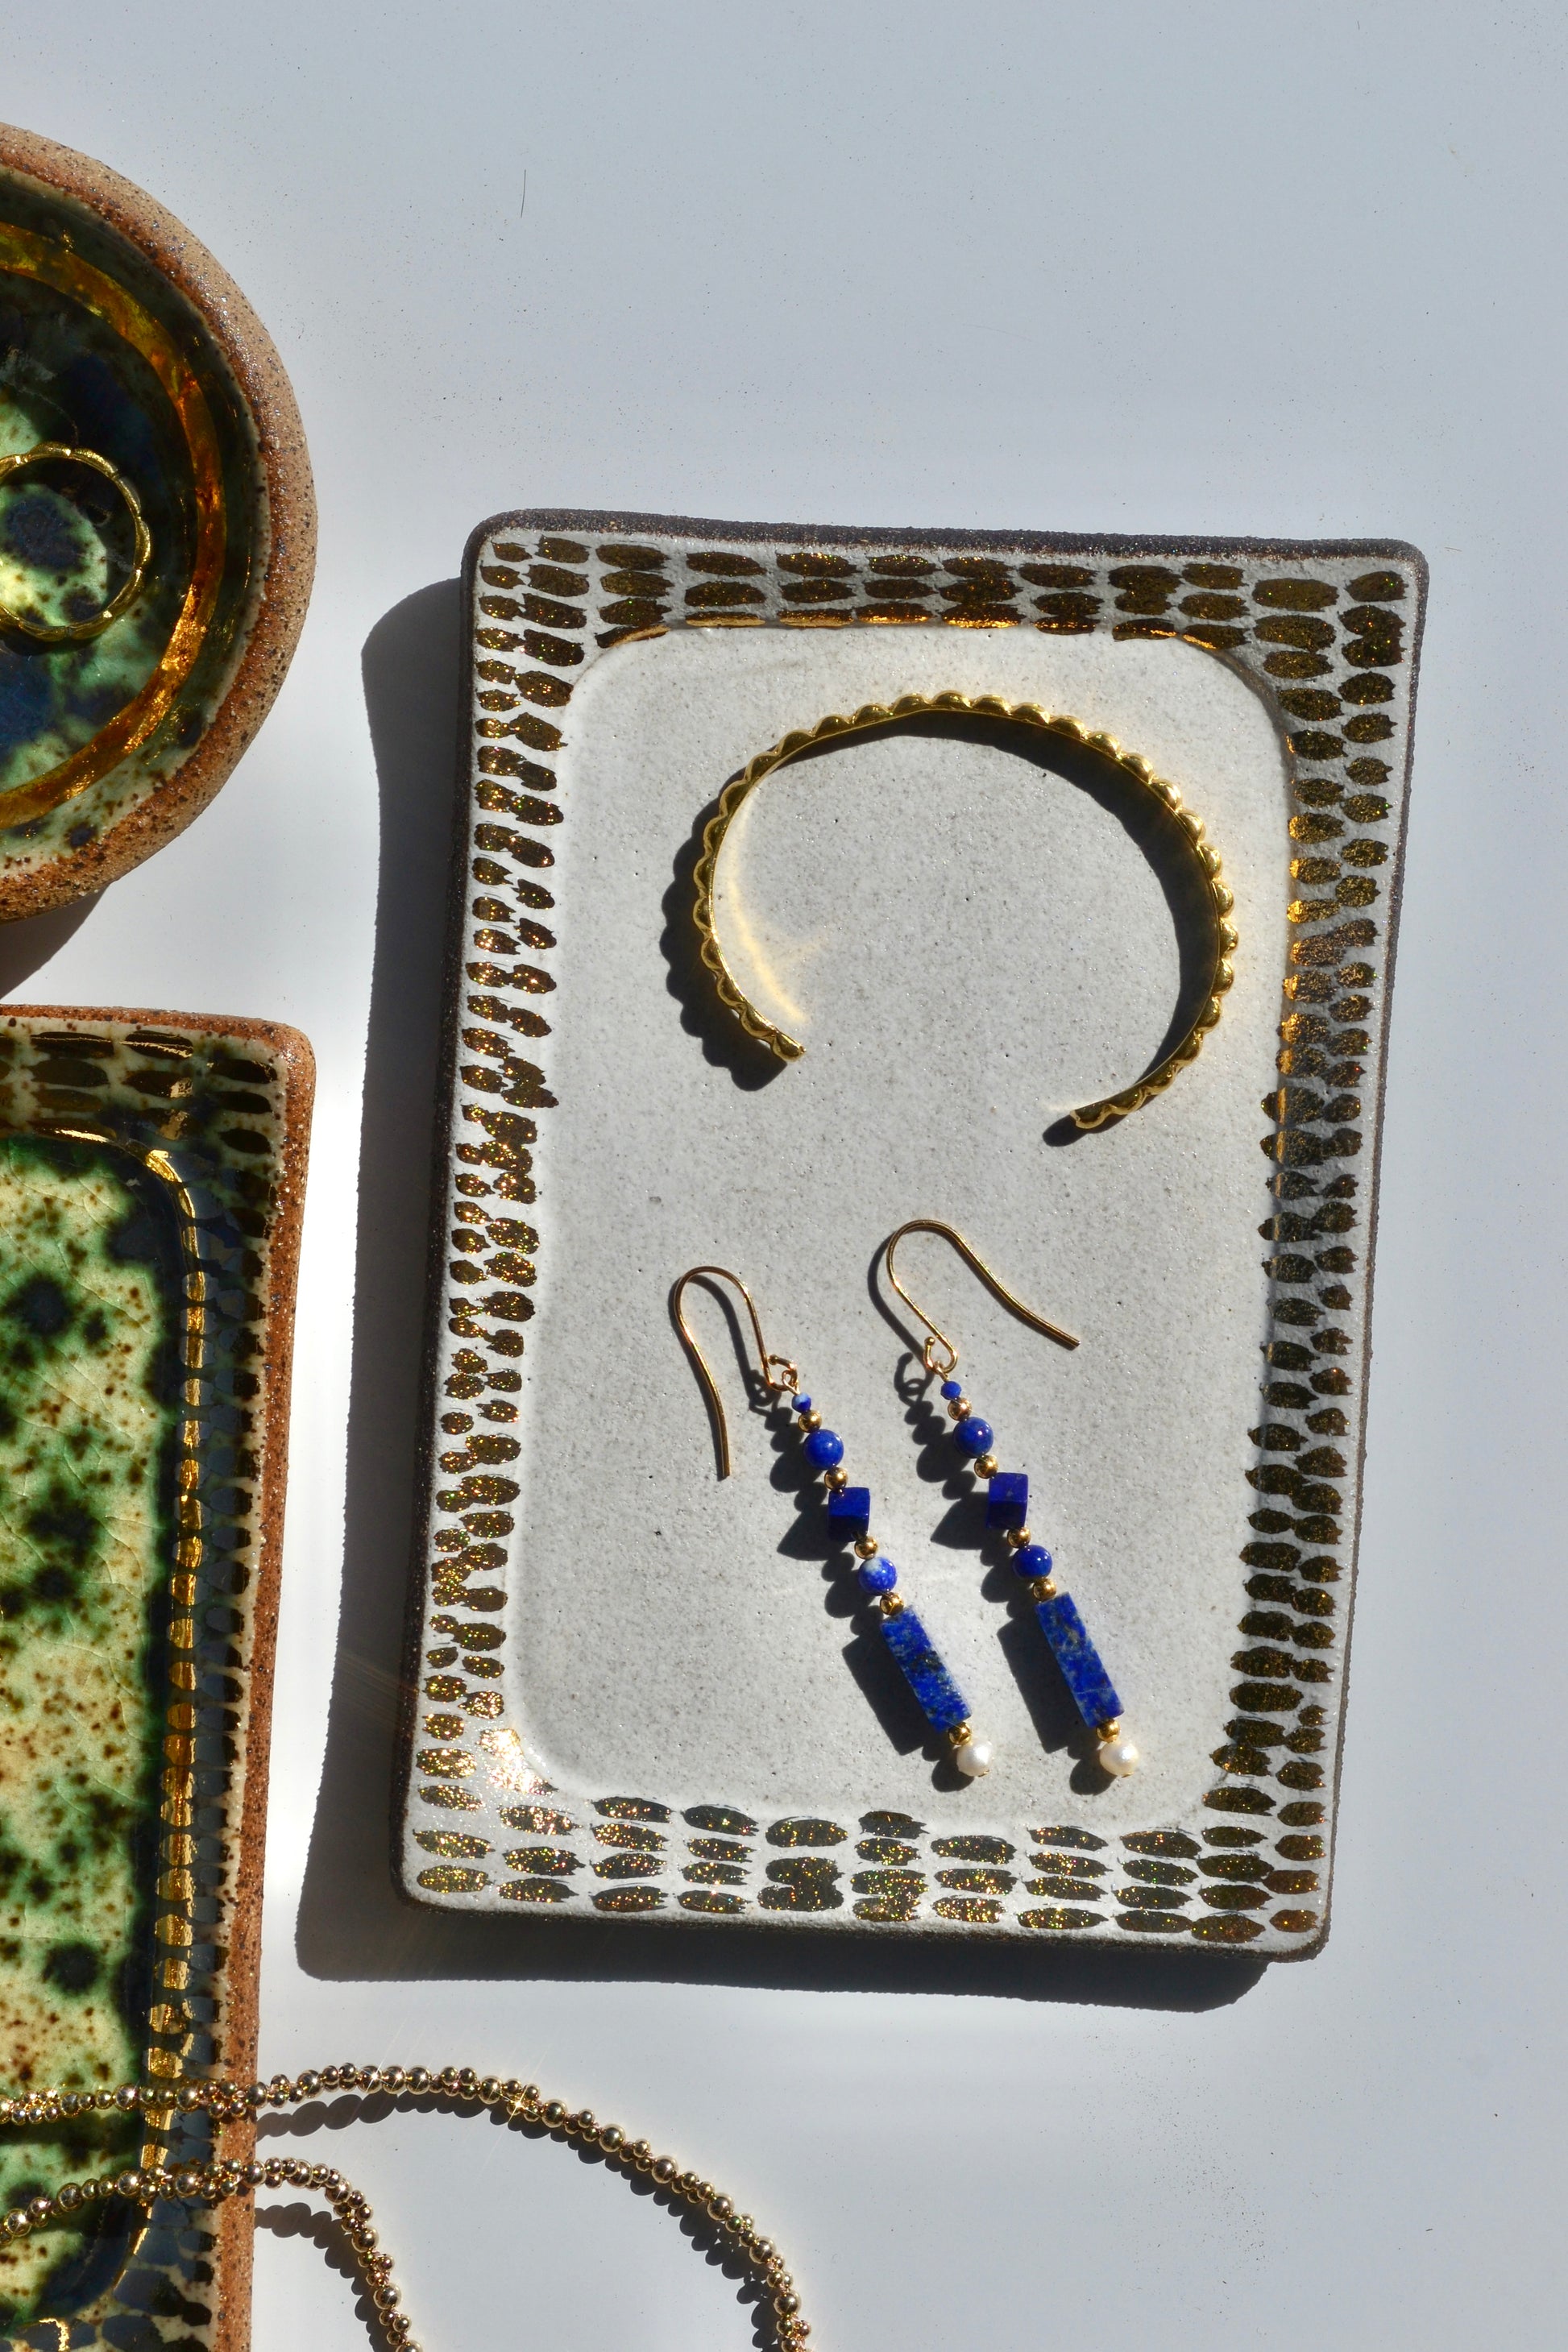 Perfect for holding a few small treasured items like rings and small jewelry items, keys, or incense bundles. Thoughtfully made with obsidian stoneware & hand painted with 22k gold luster accents